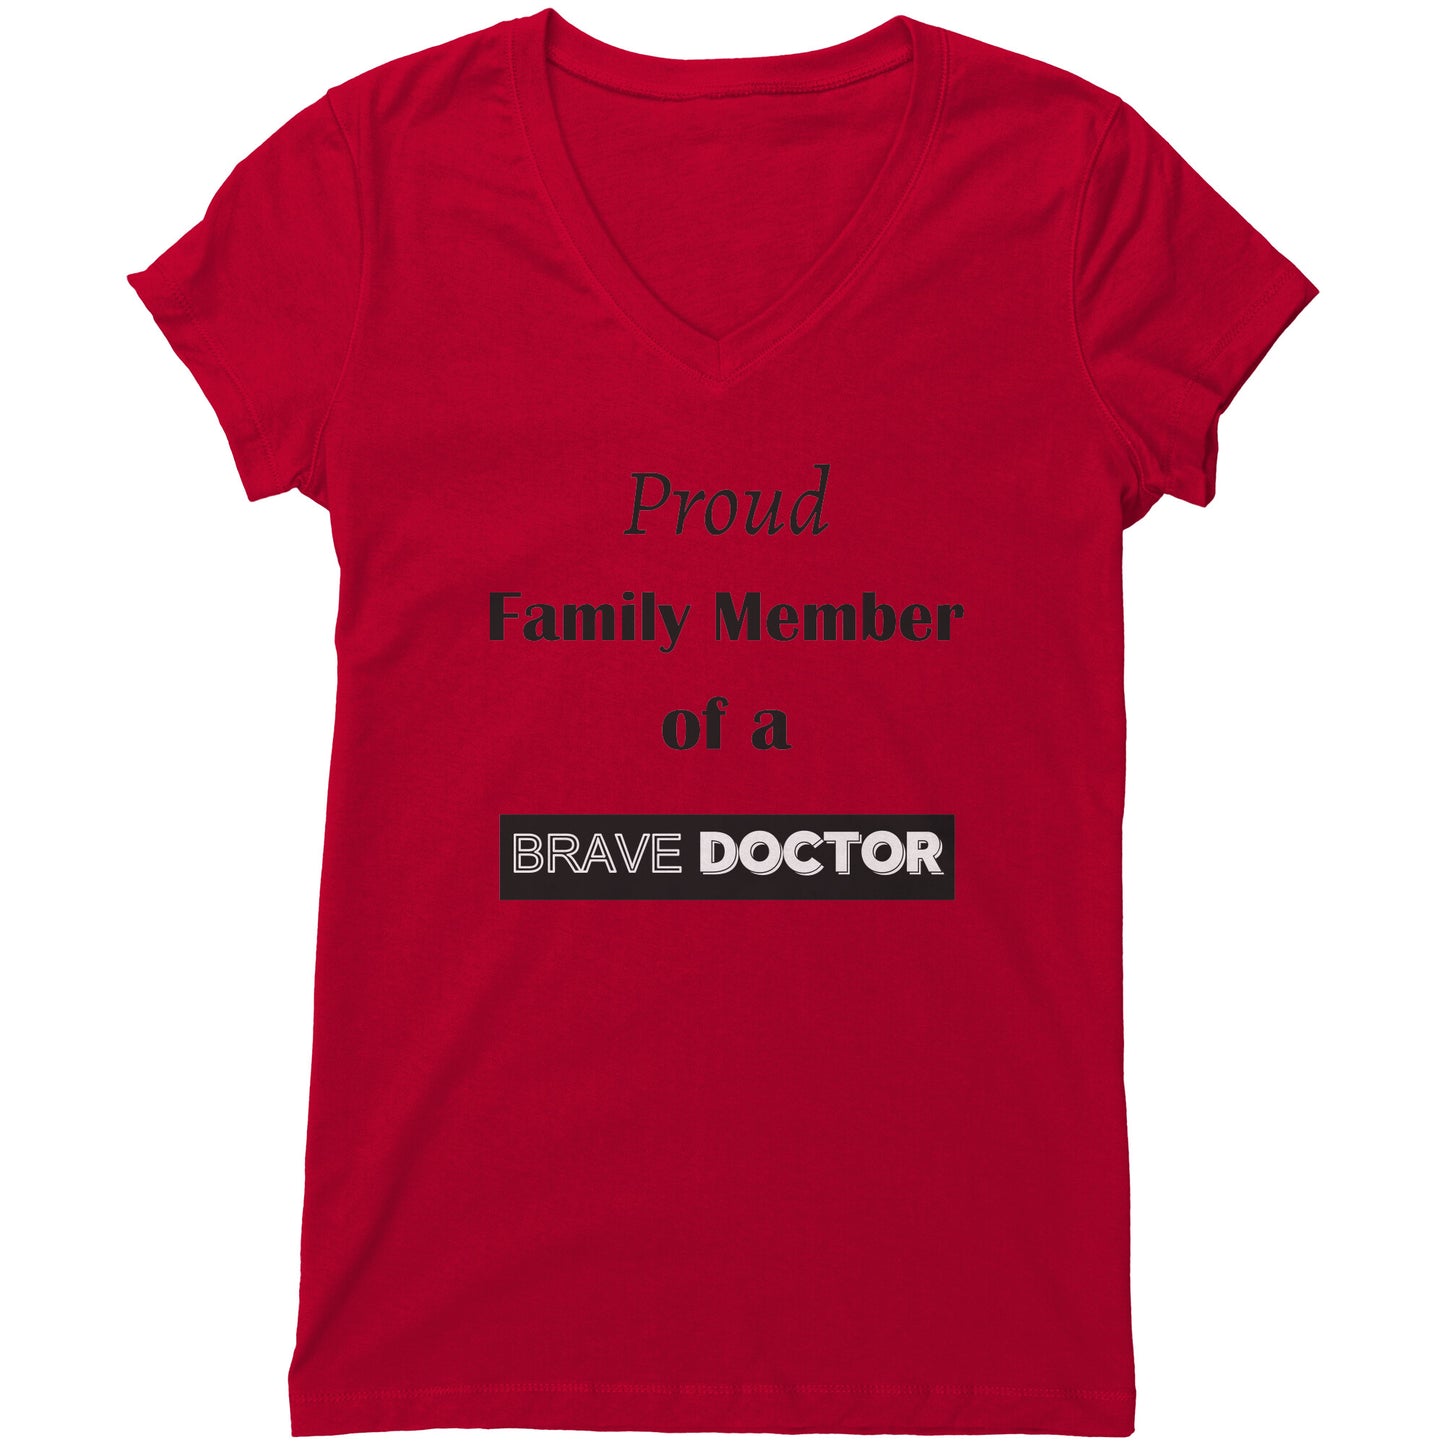 Proud Family Member of a Brave Doctor Lettering Womens Shirt - Signs and Seasons Gifts